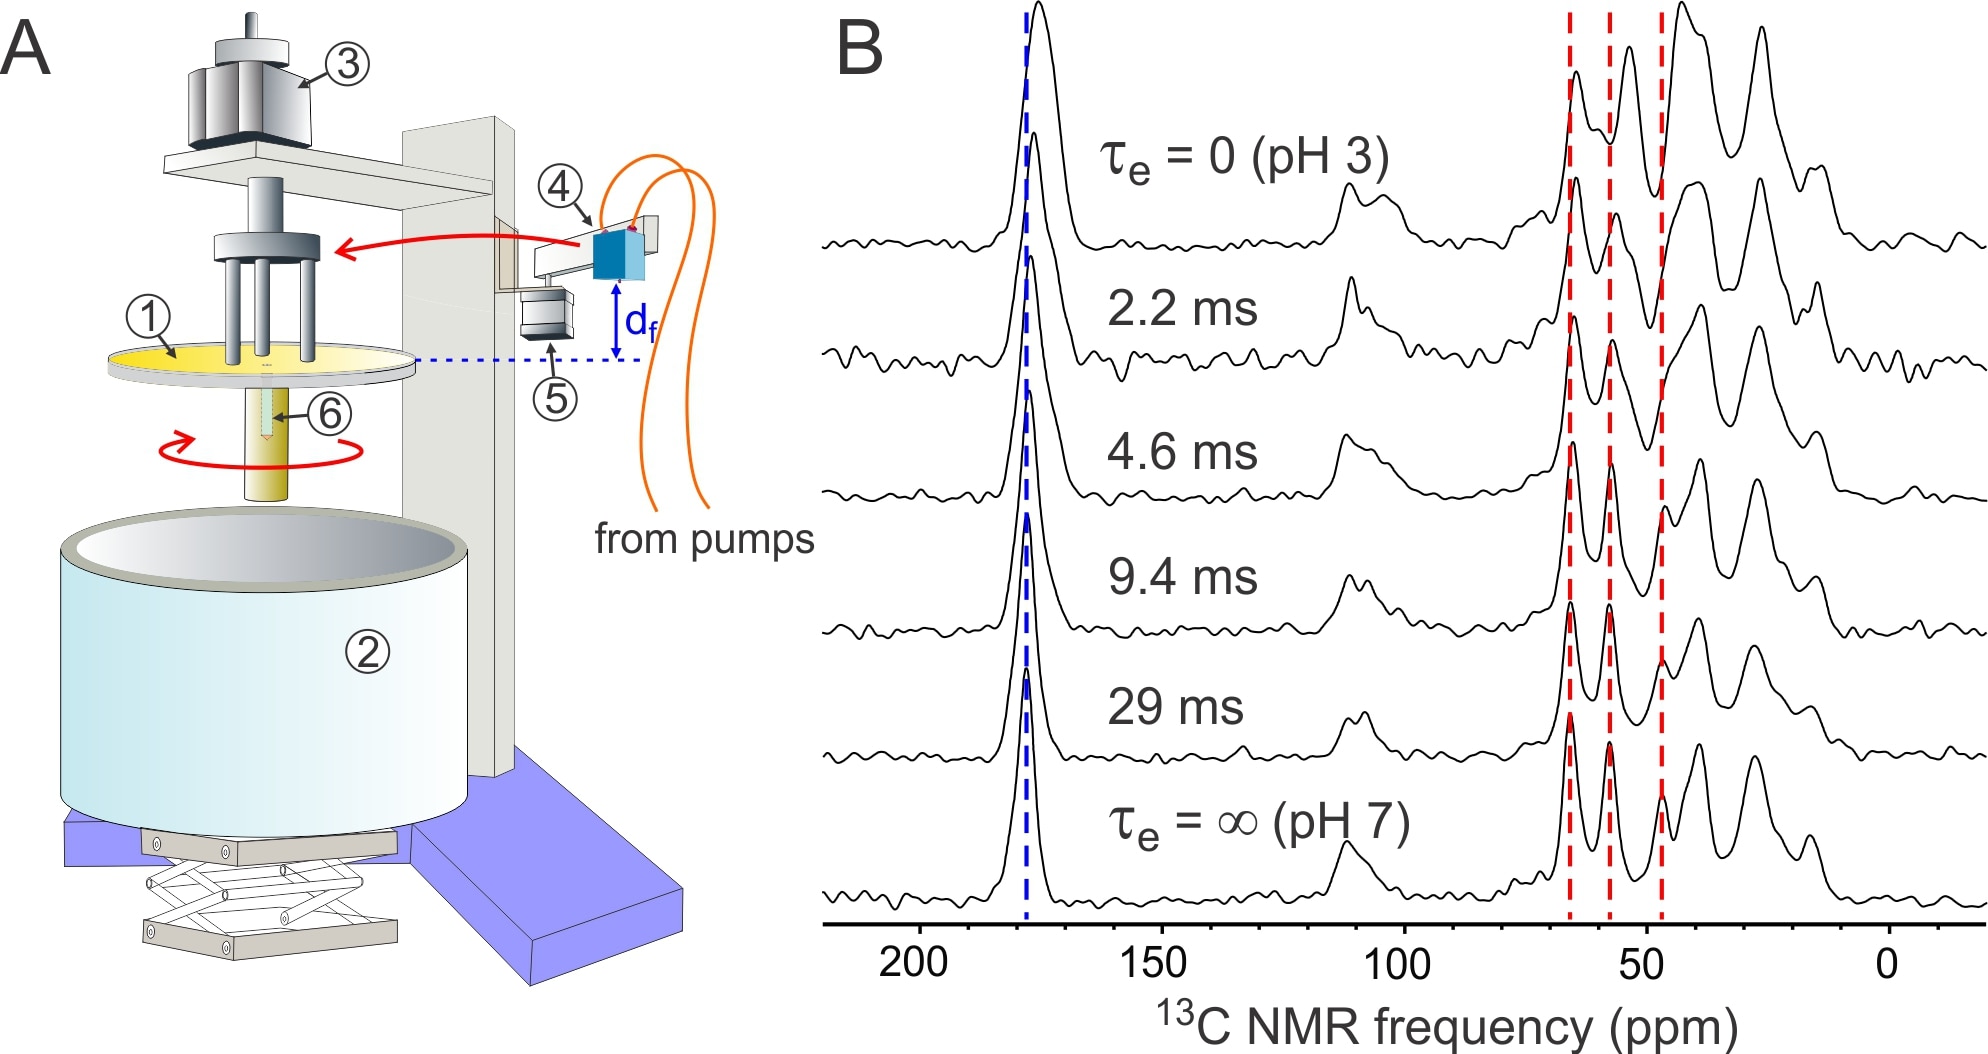 Characterization of the folding and self-assembly of melittin peptides by time-resolved solid state NMR